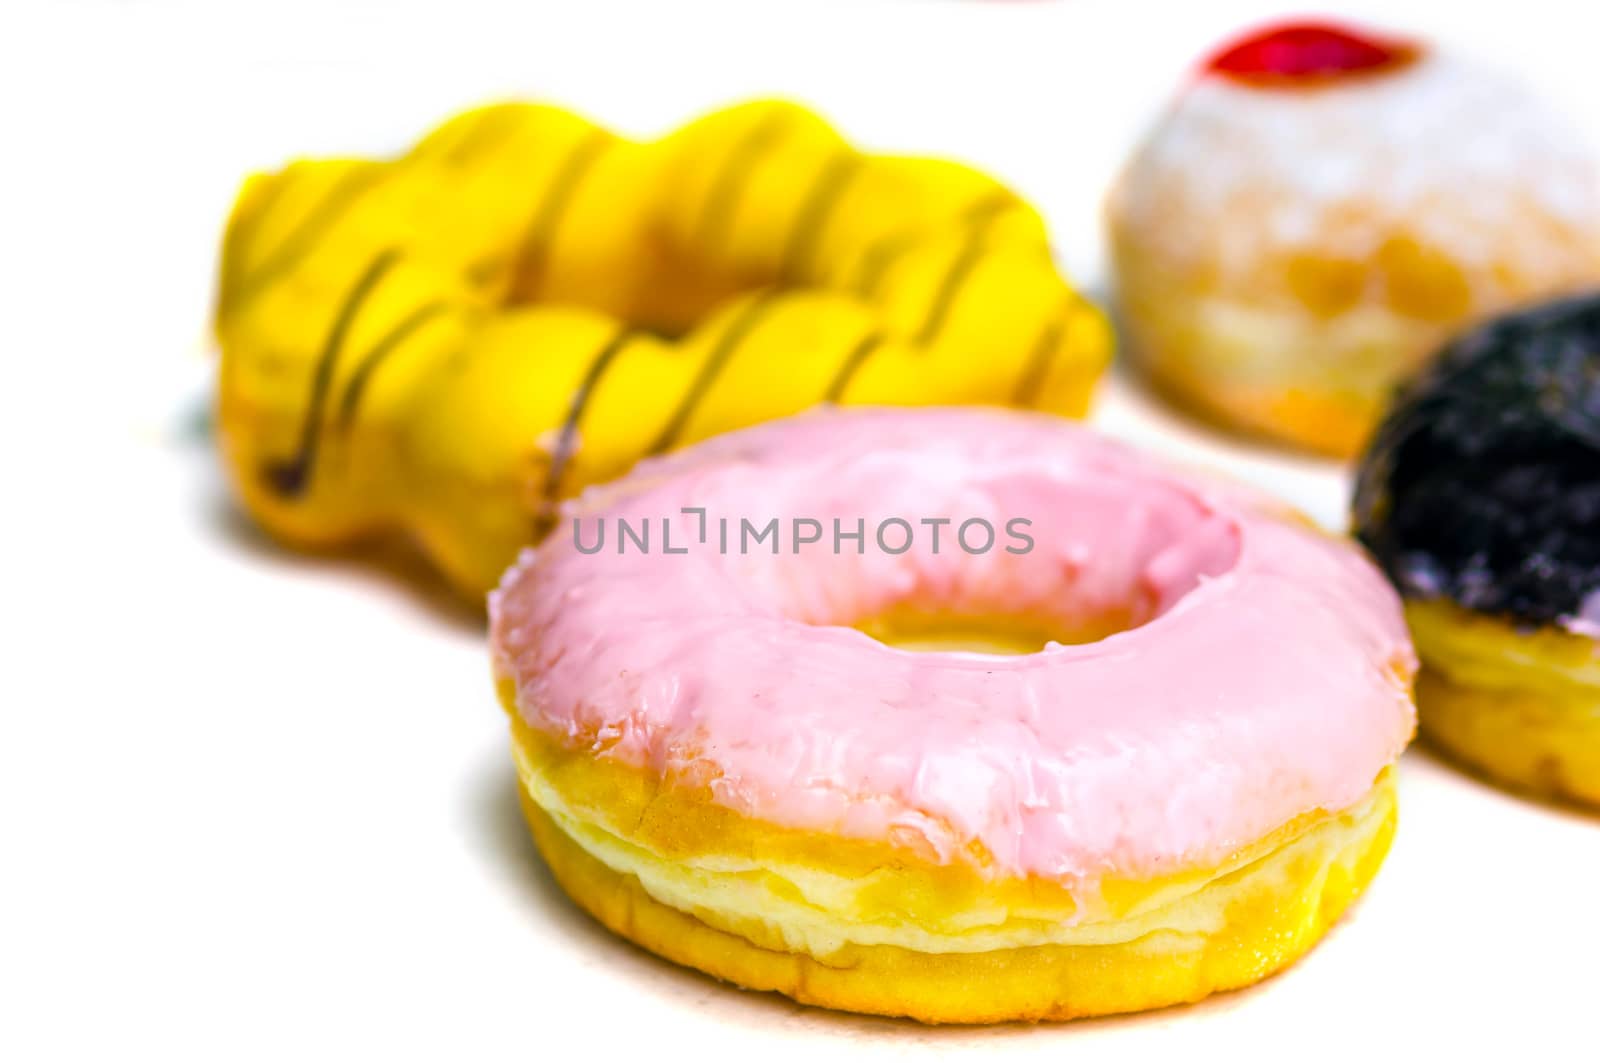 Group of donuts on white background.